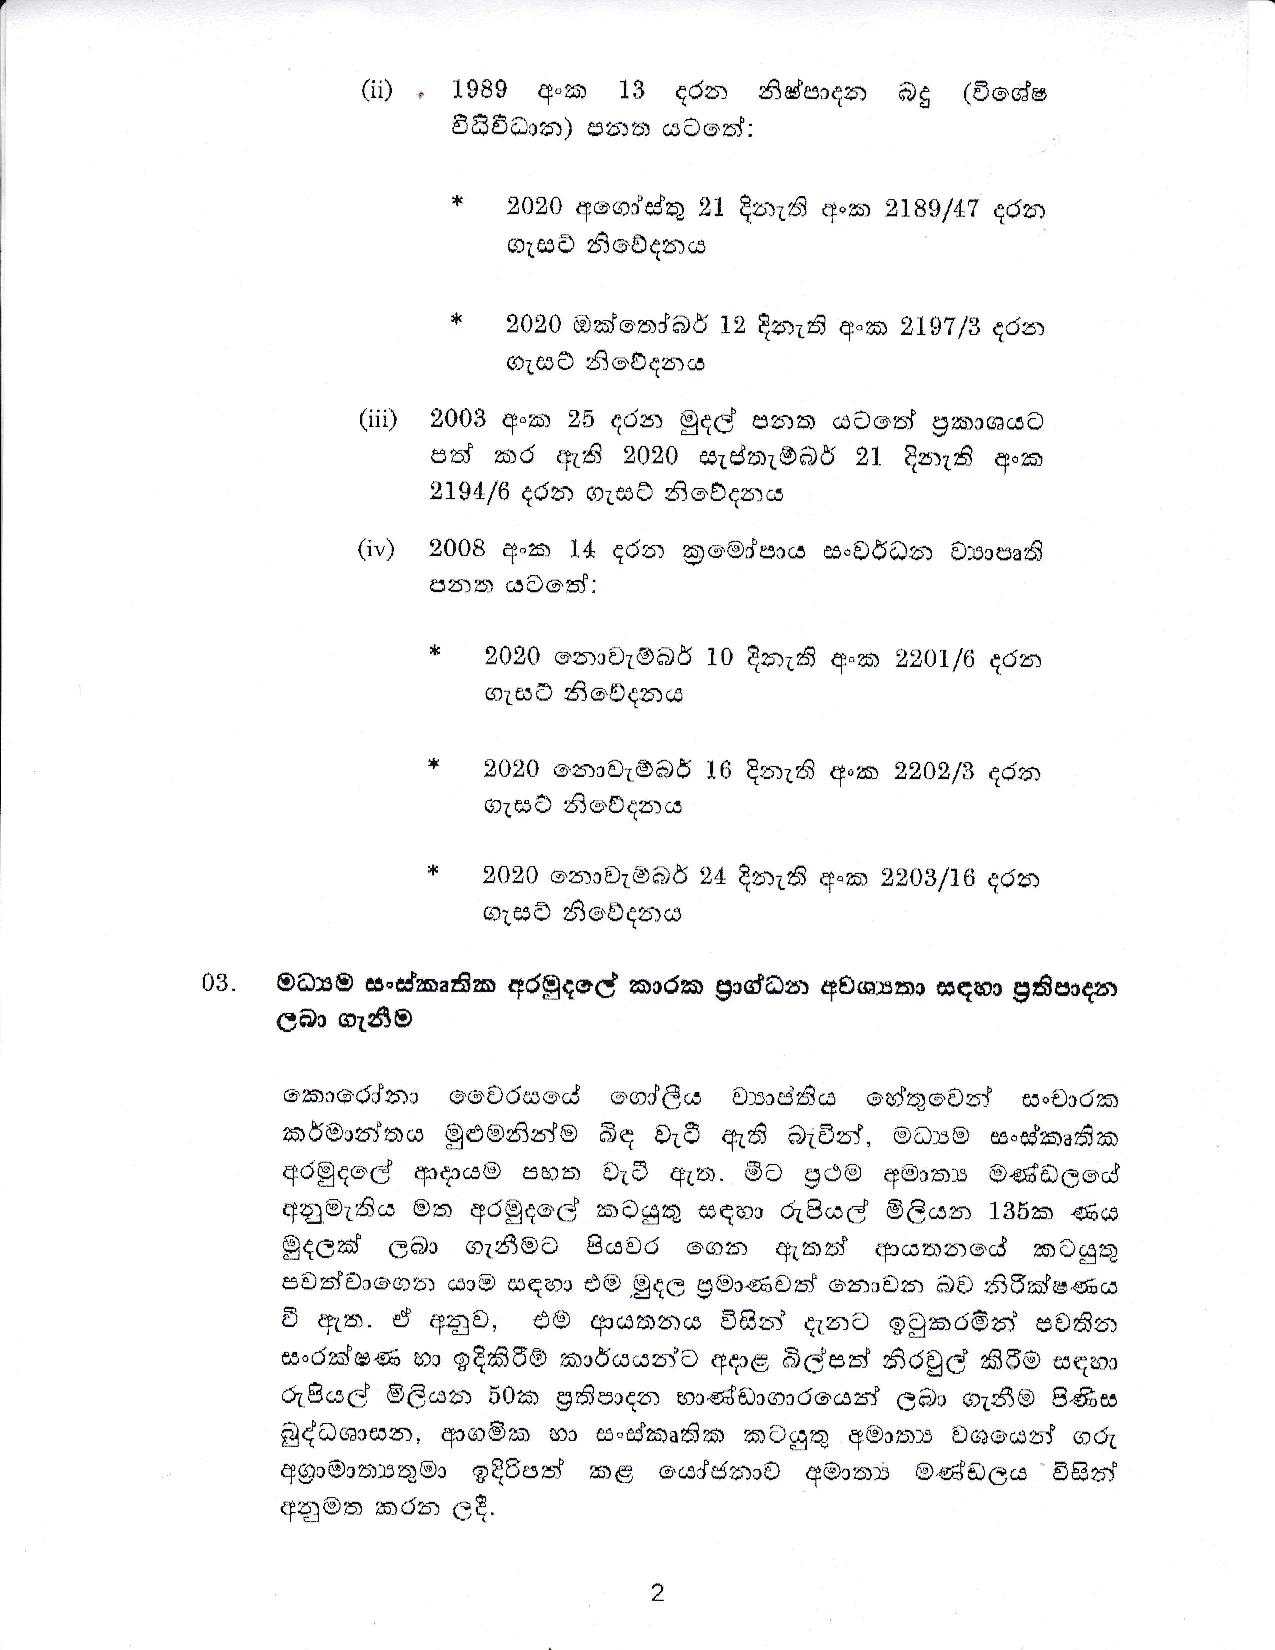 Cabinet Decision on 07.12.2020 page 002